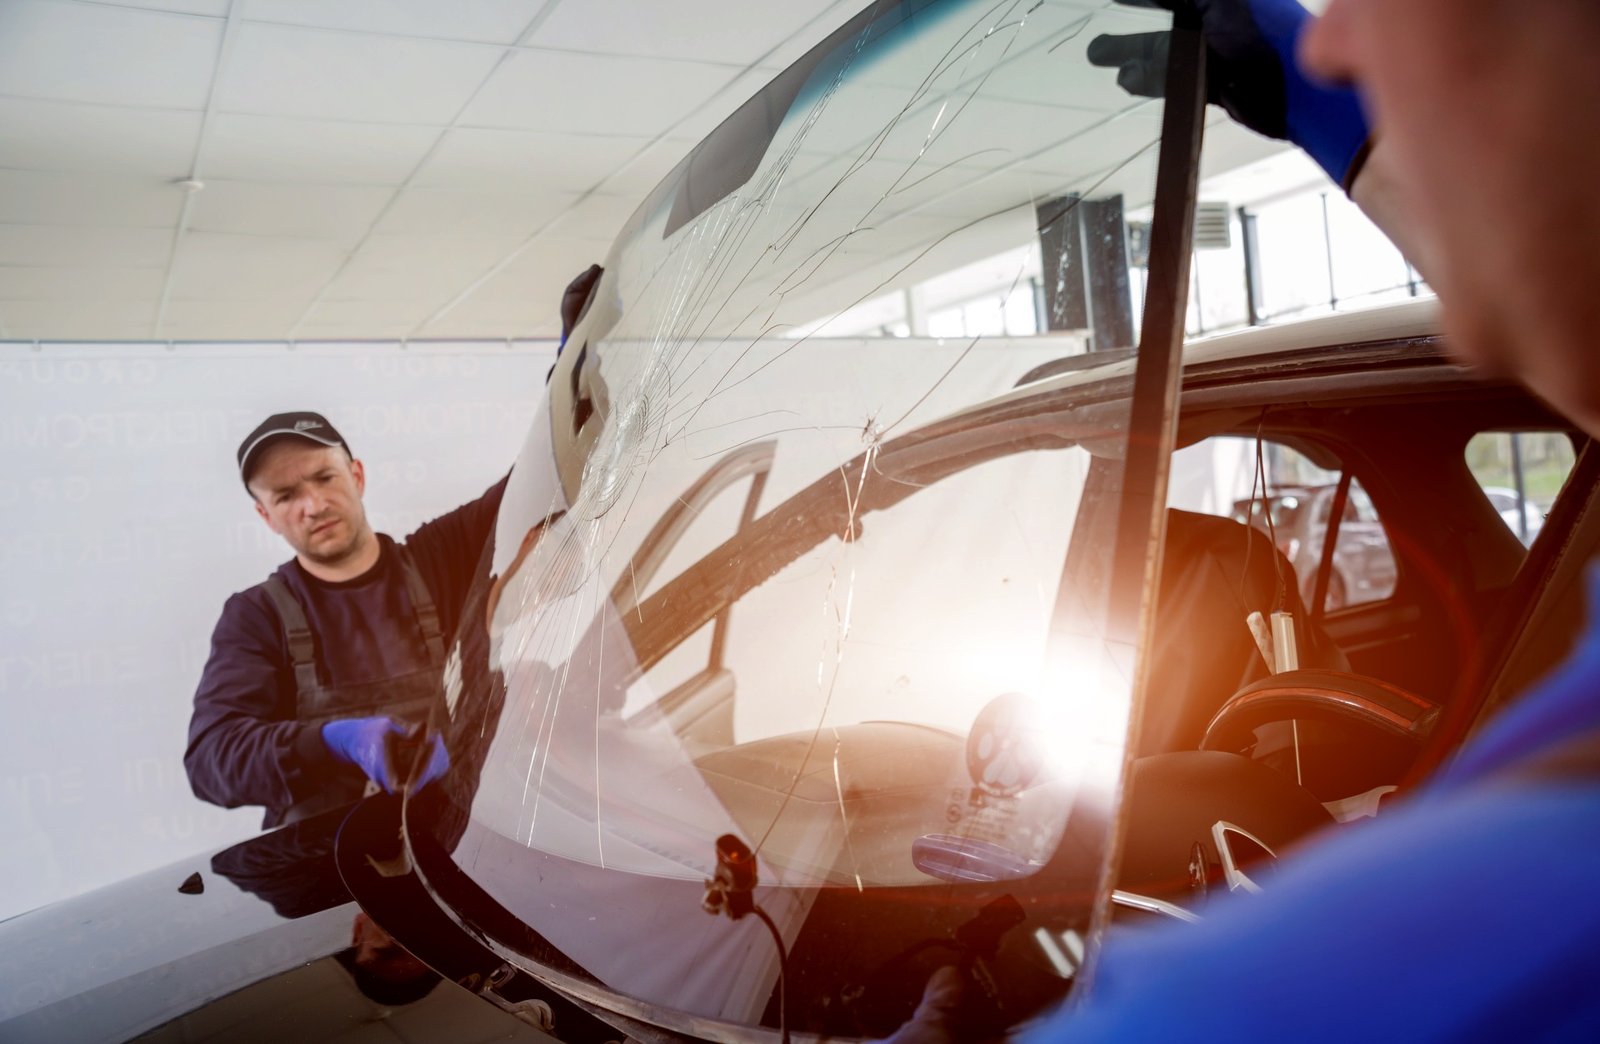 Keeping Your Vehicle Safe and sound with Windshield Replacement and Auto Glass Repair in Van Nuys